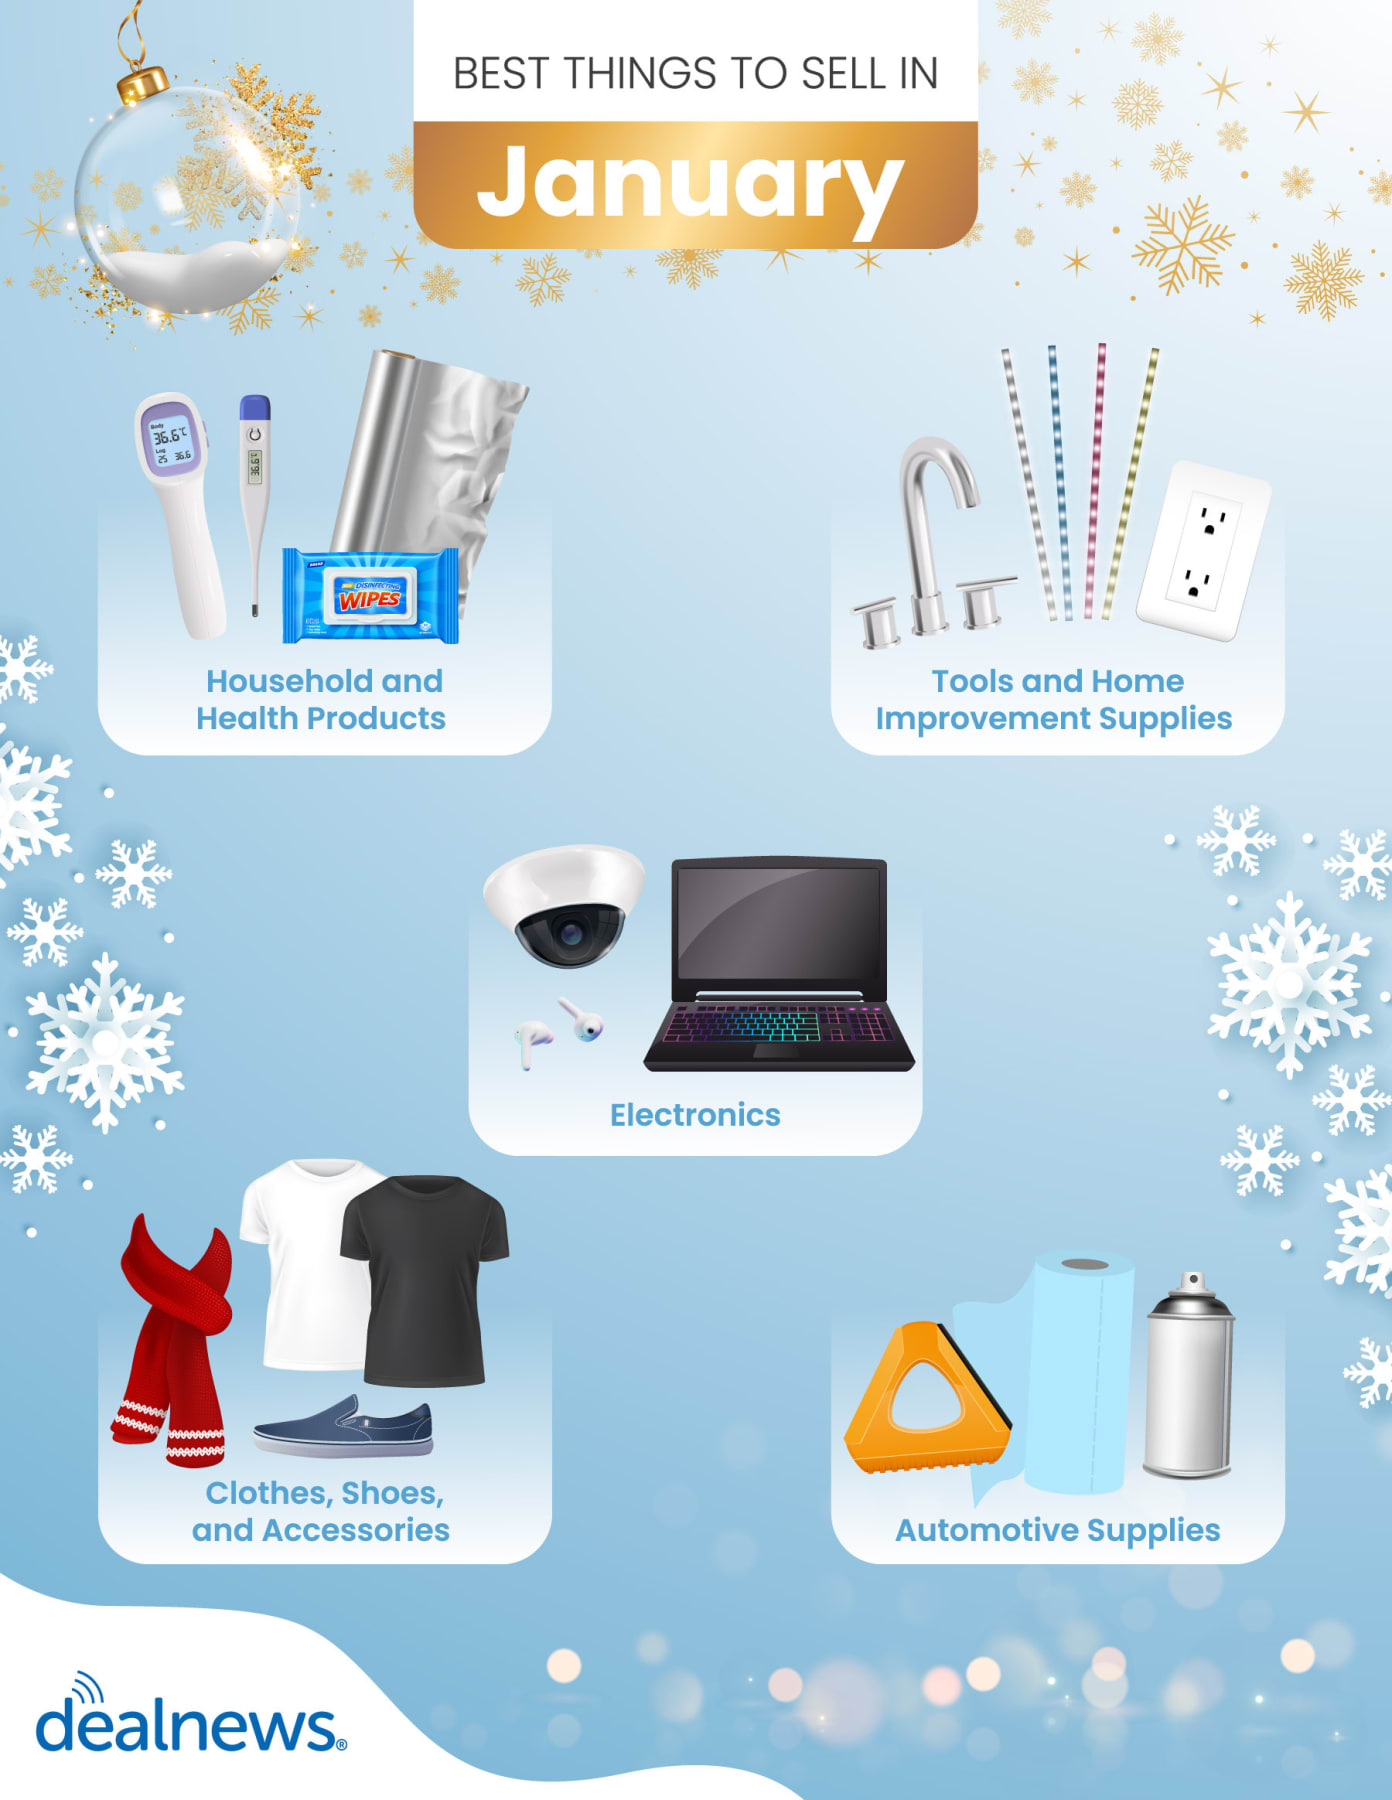 Five of the best things to sell in January shown in infographic.